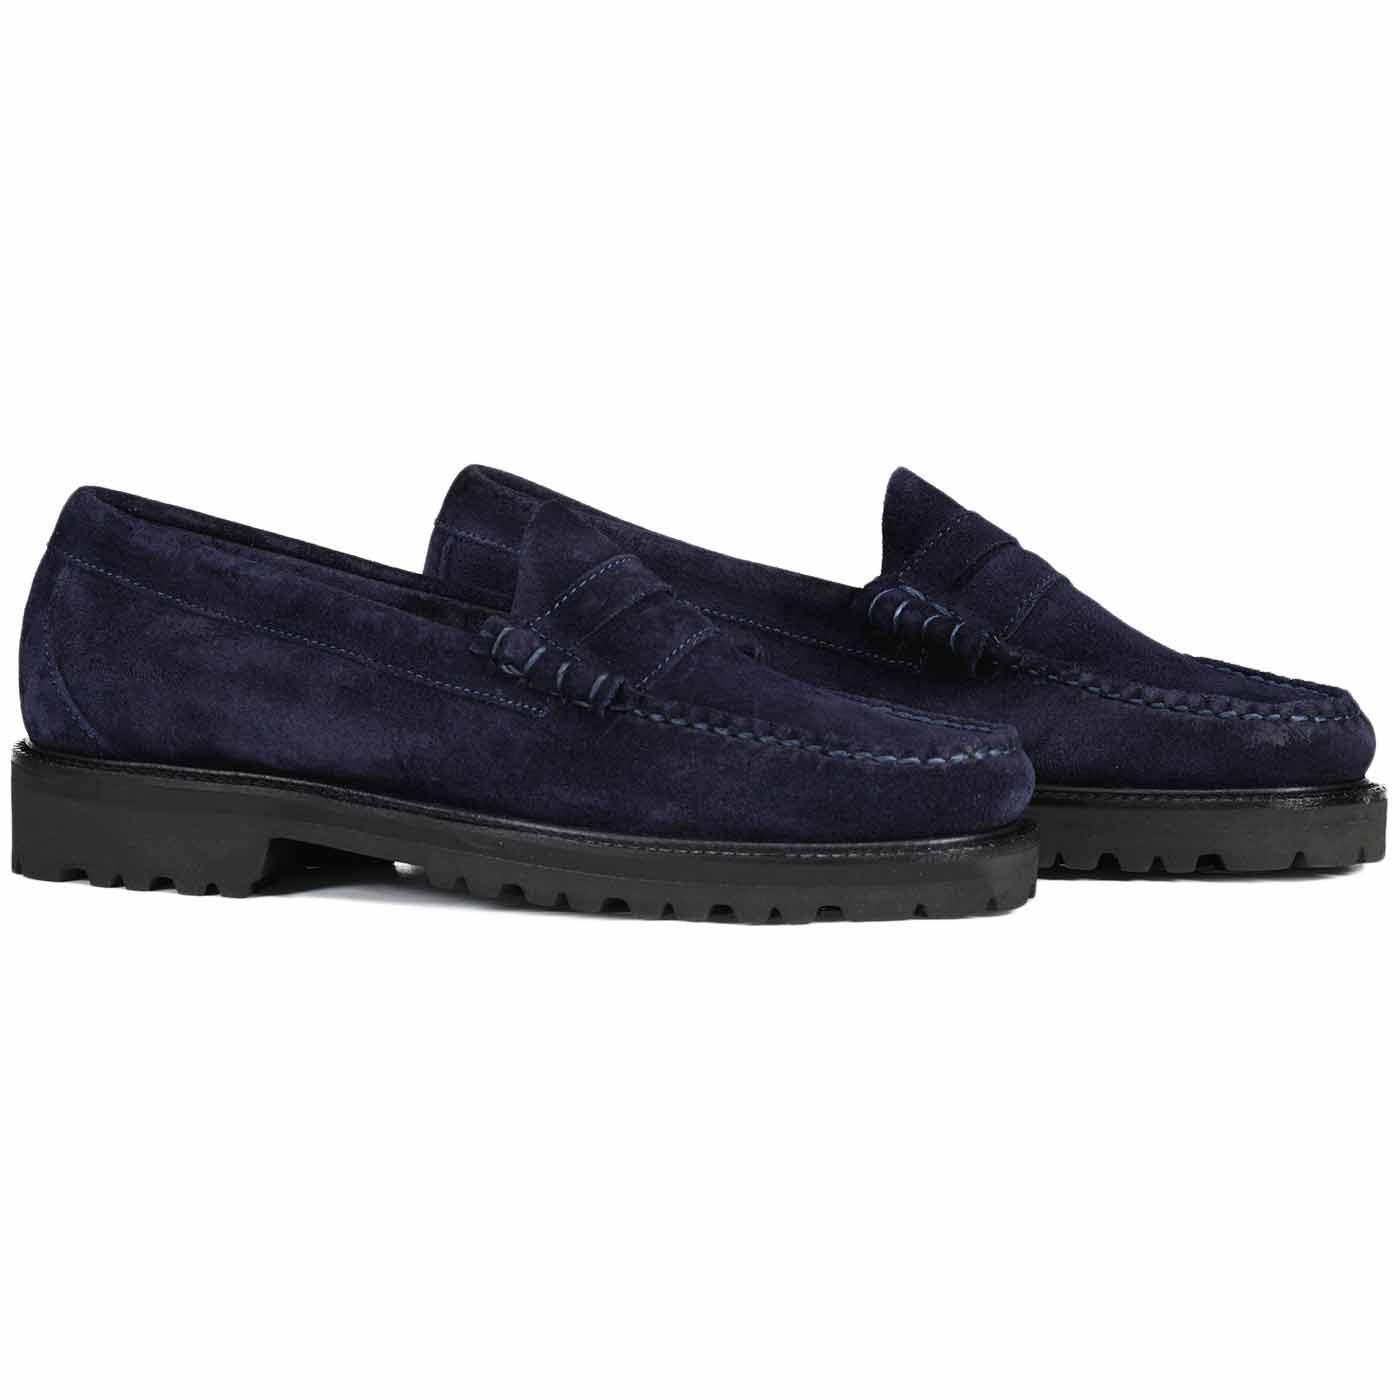 BASS WEEJUNS Larson Suede Mod Weejun 90 Loafers in Navy